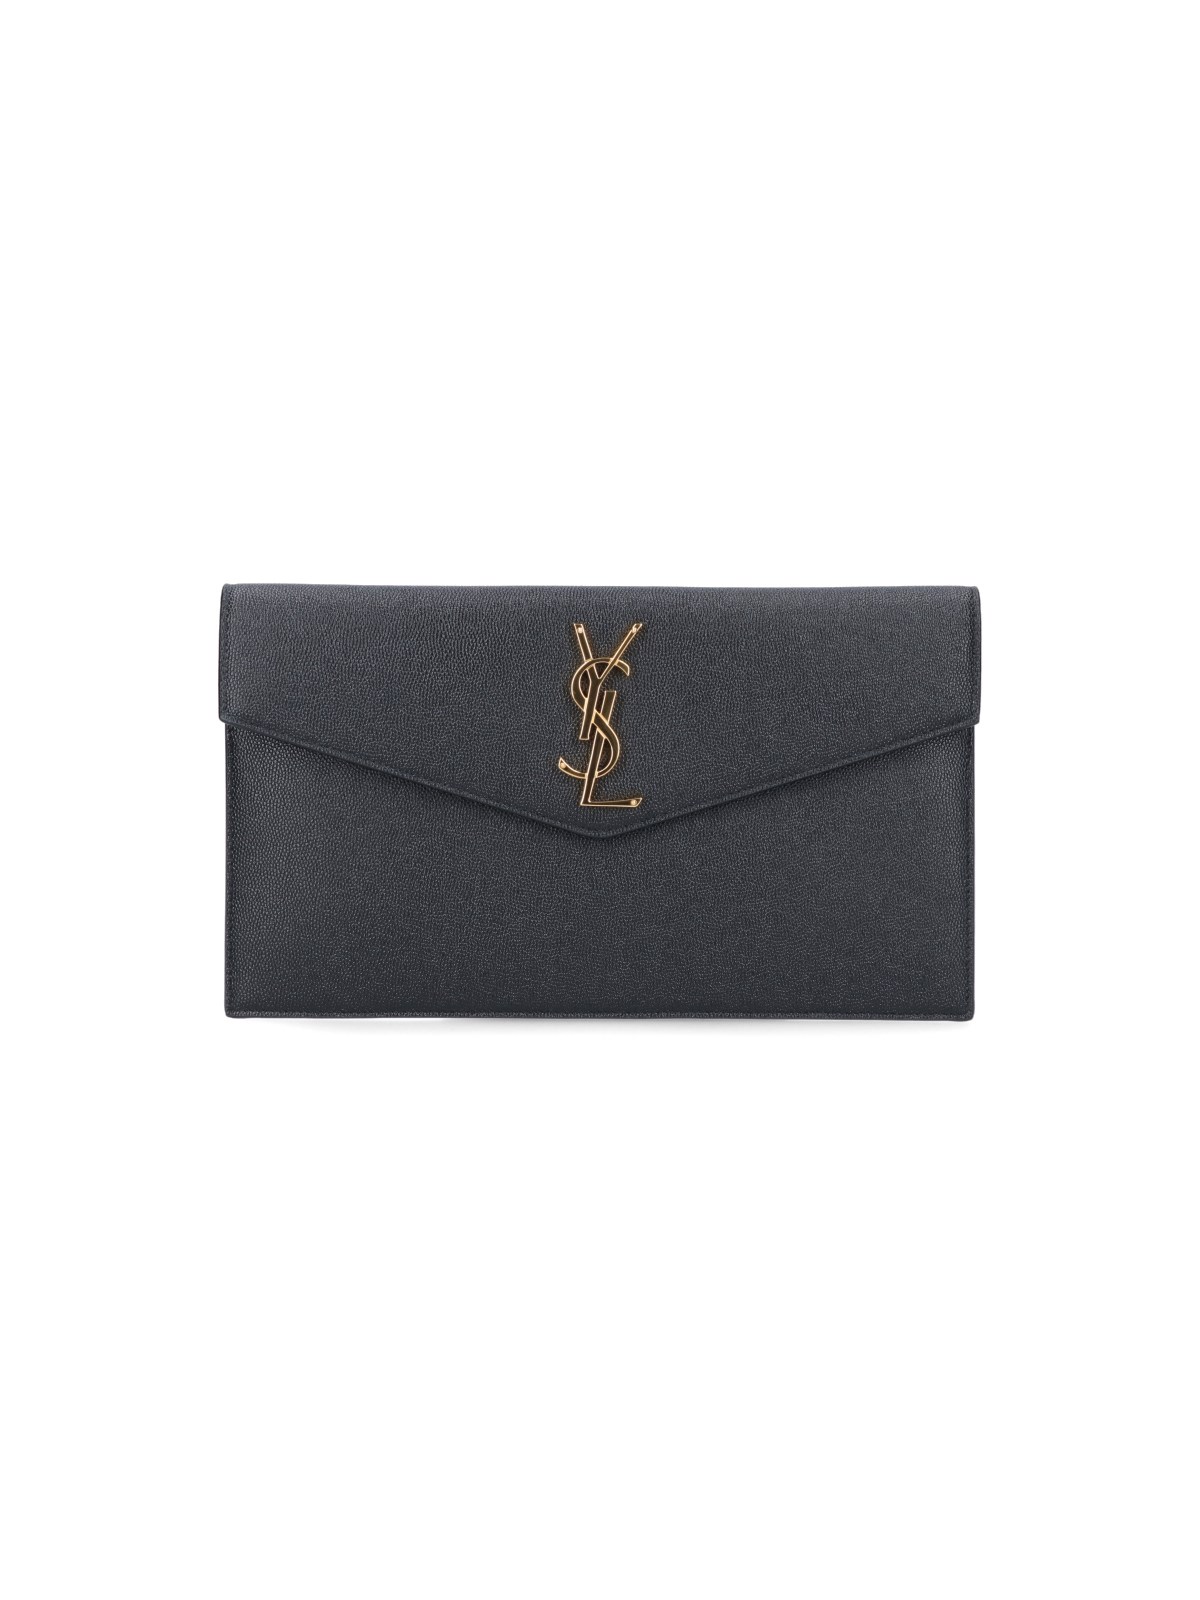 First YSL Purchase - Uptown Pouch